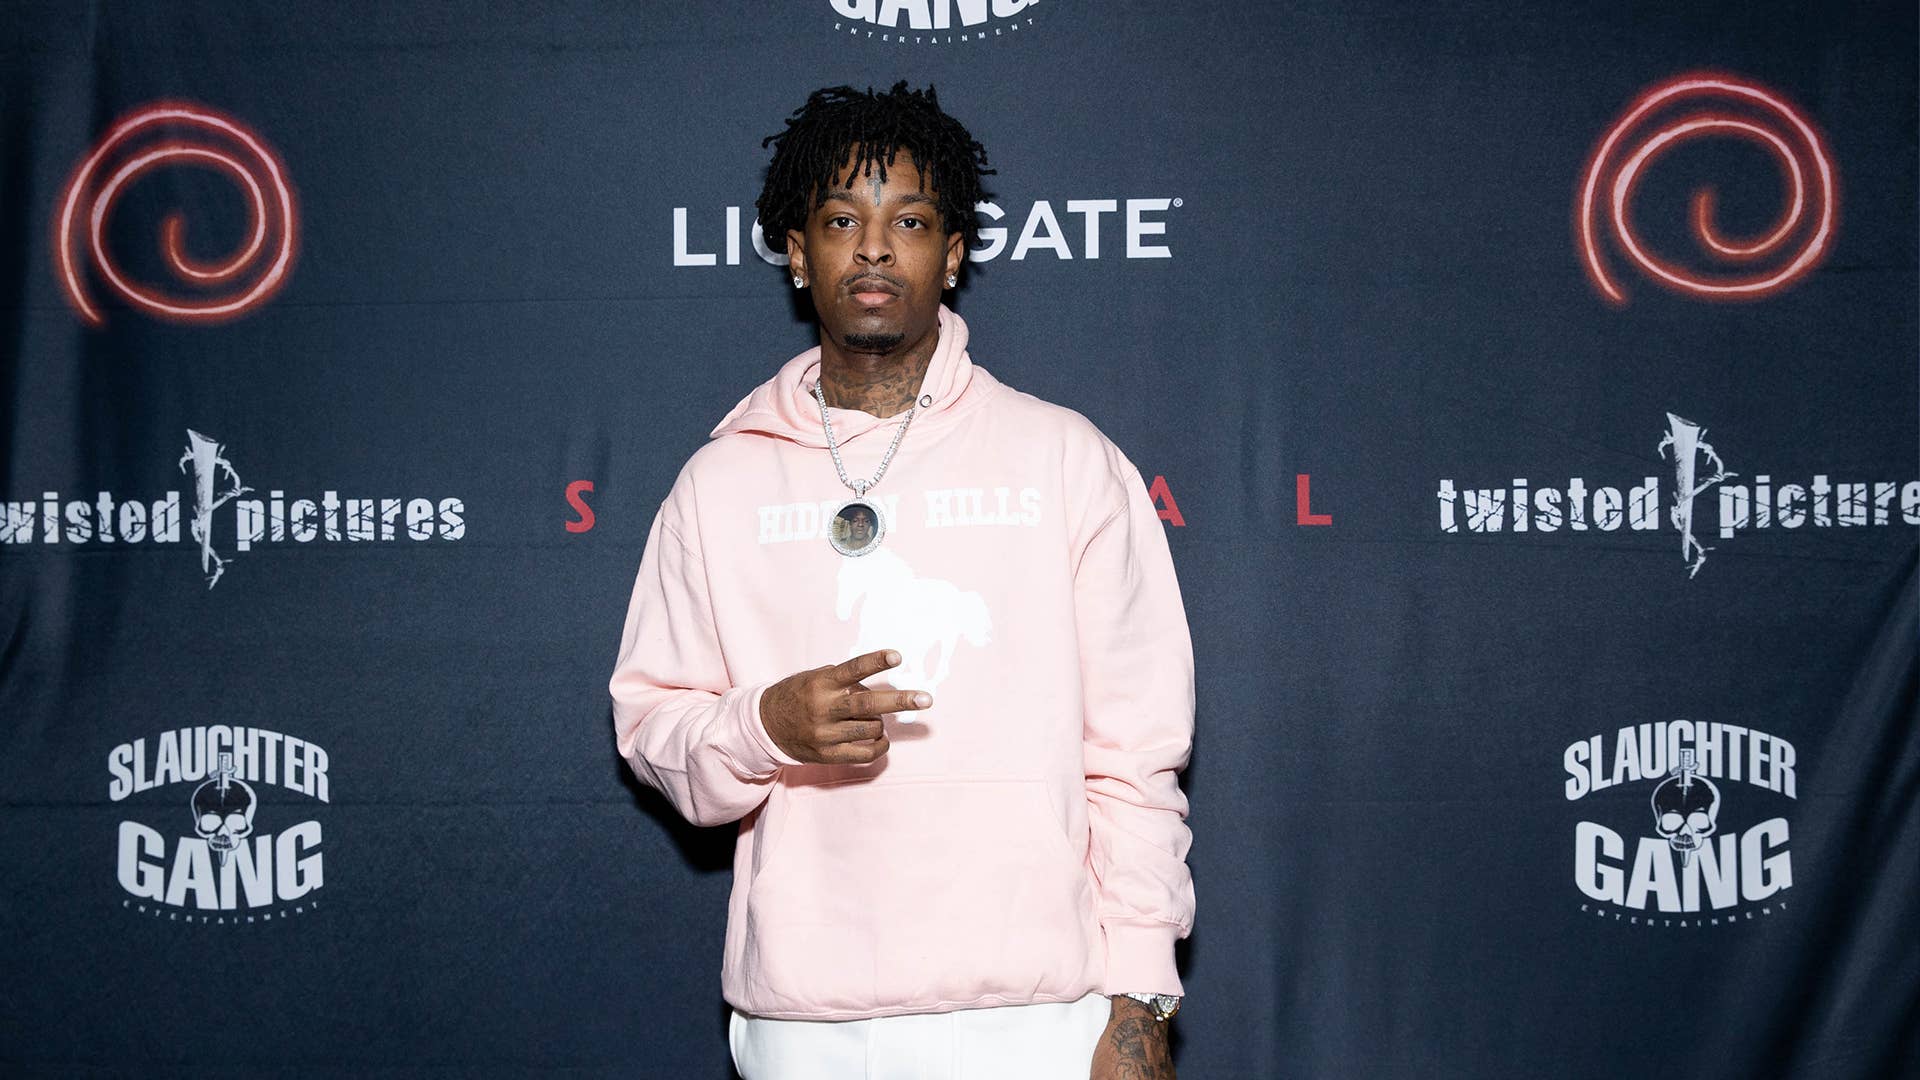 21 Savage Logs Off Instagram Live After Getting Too Much Hate - XXL